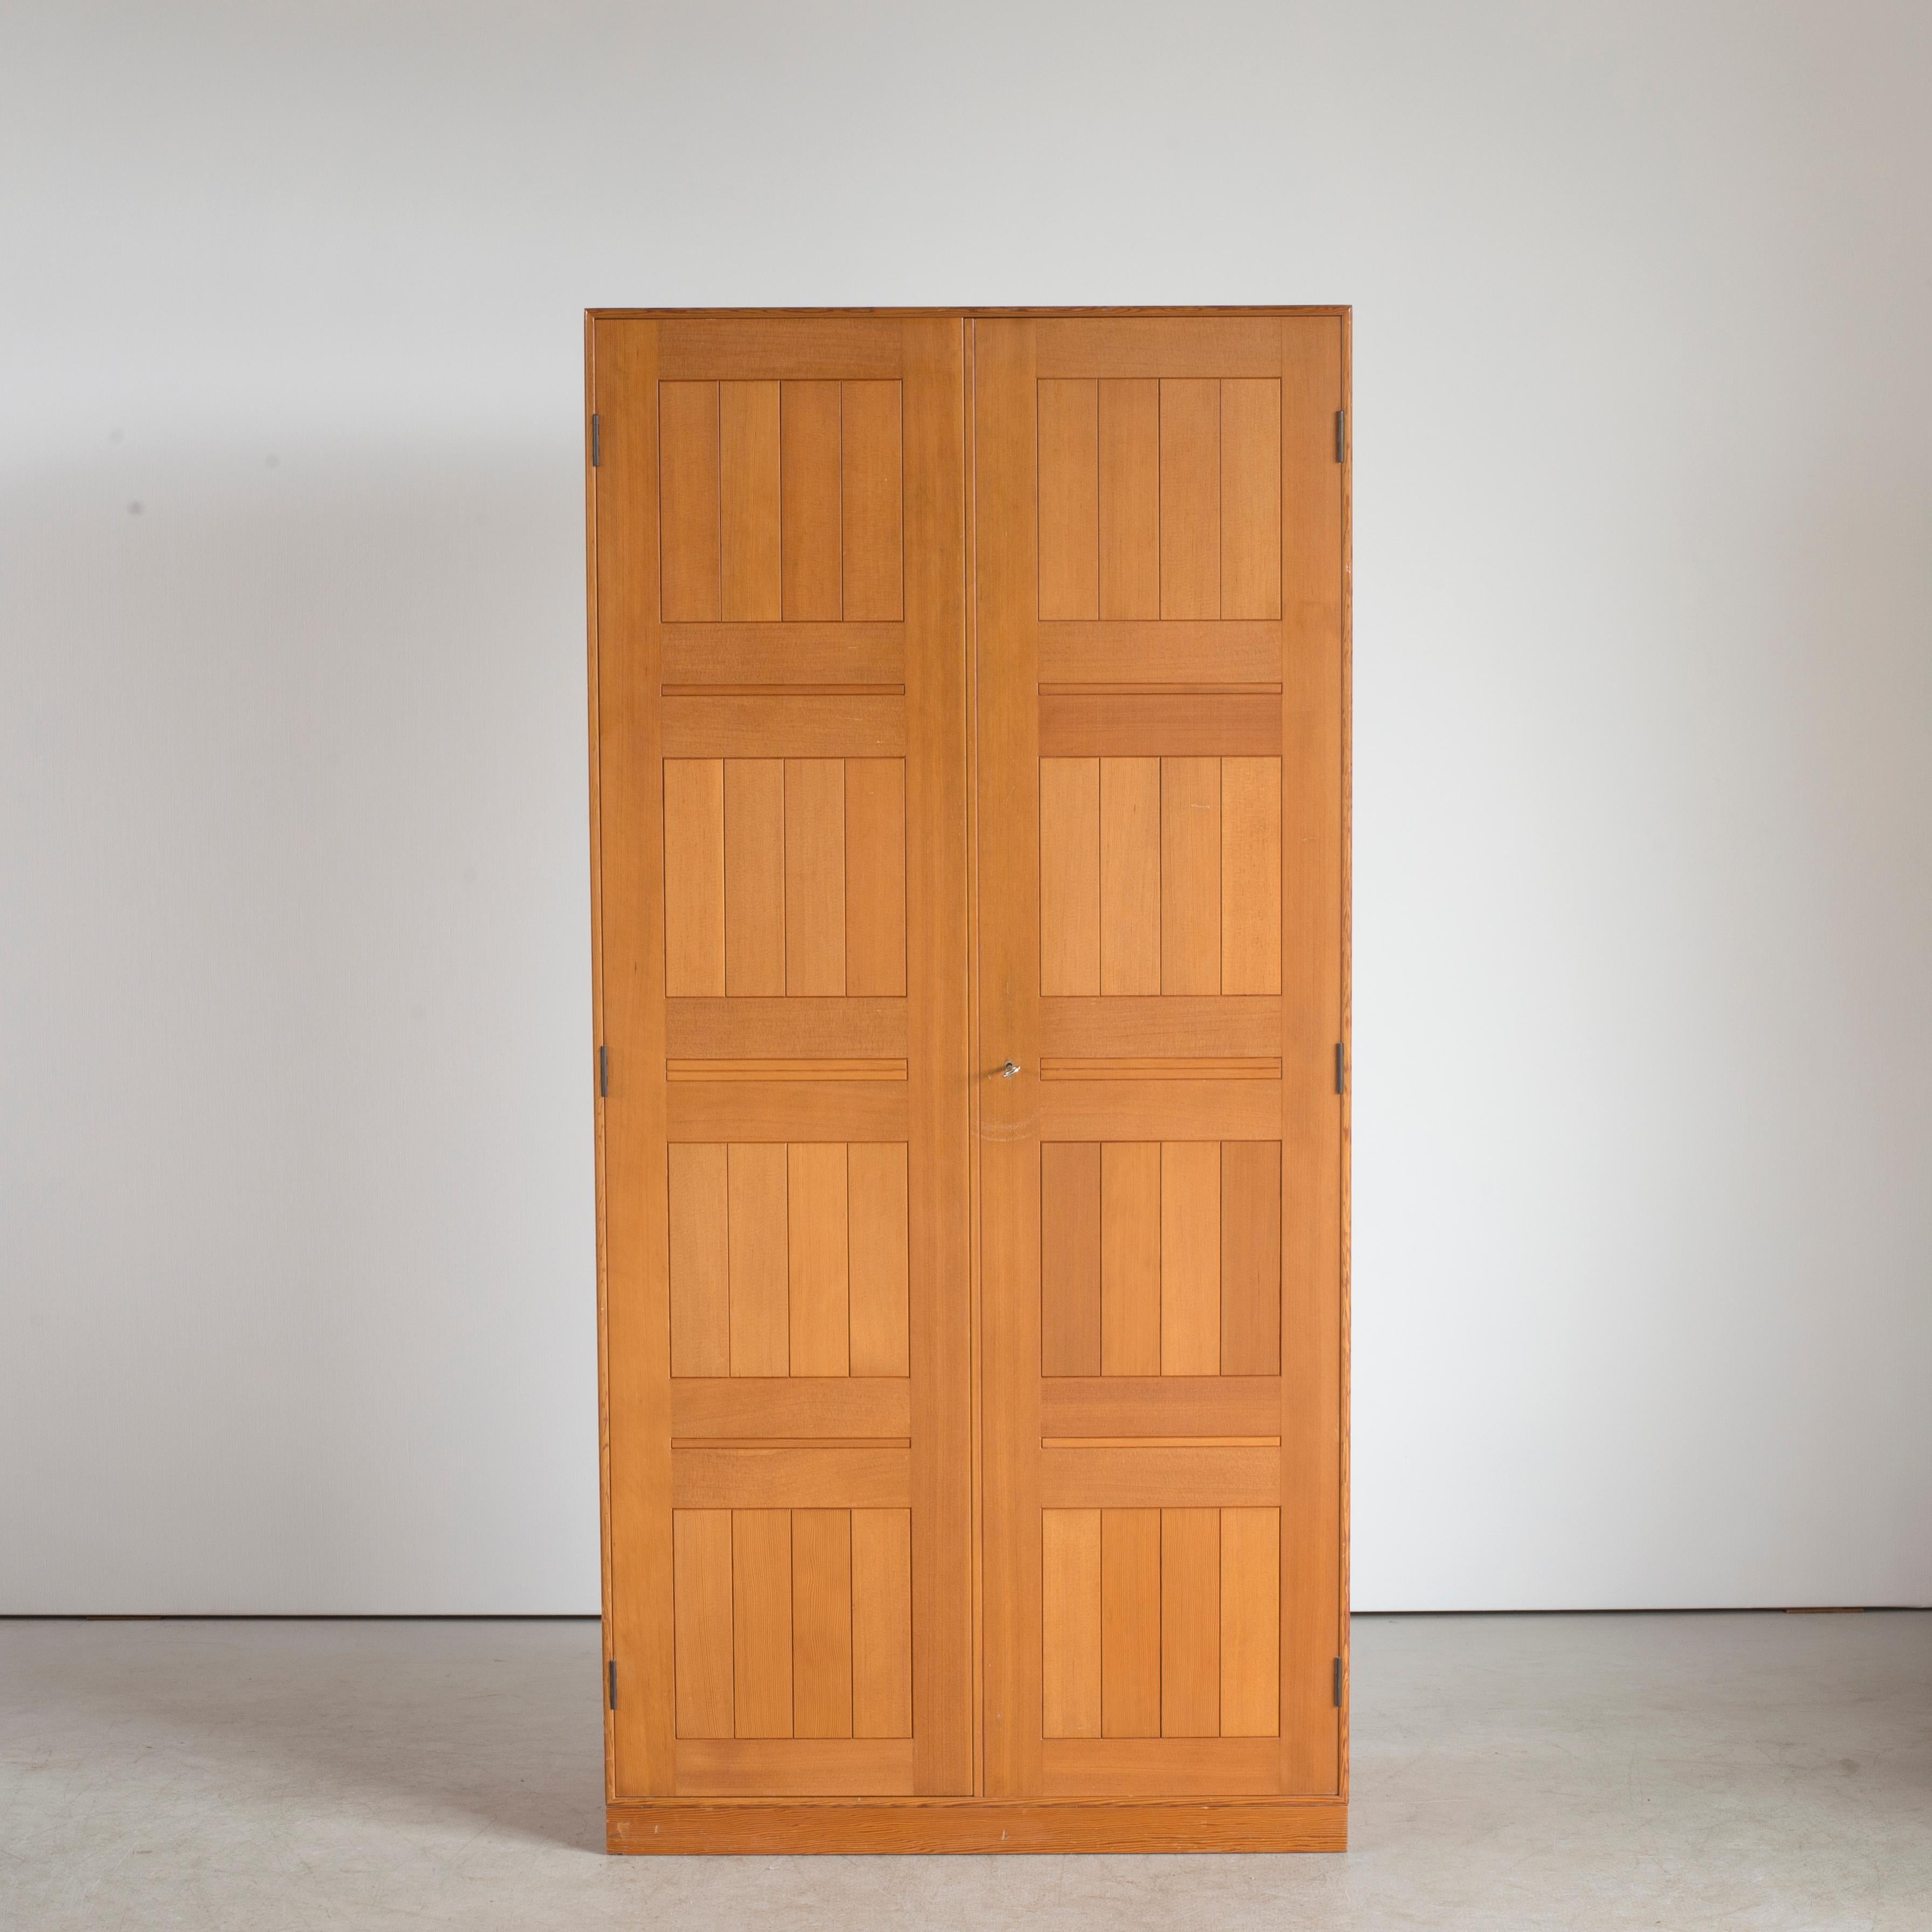 Wardrobe of Oregon pine with matching plinth. Made and marked by Rud. Rasmussen cabinetmakers, Copenhagen.